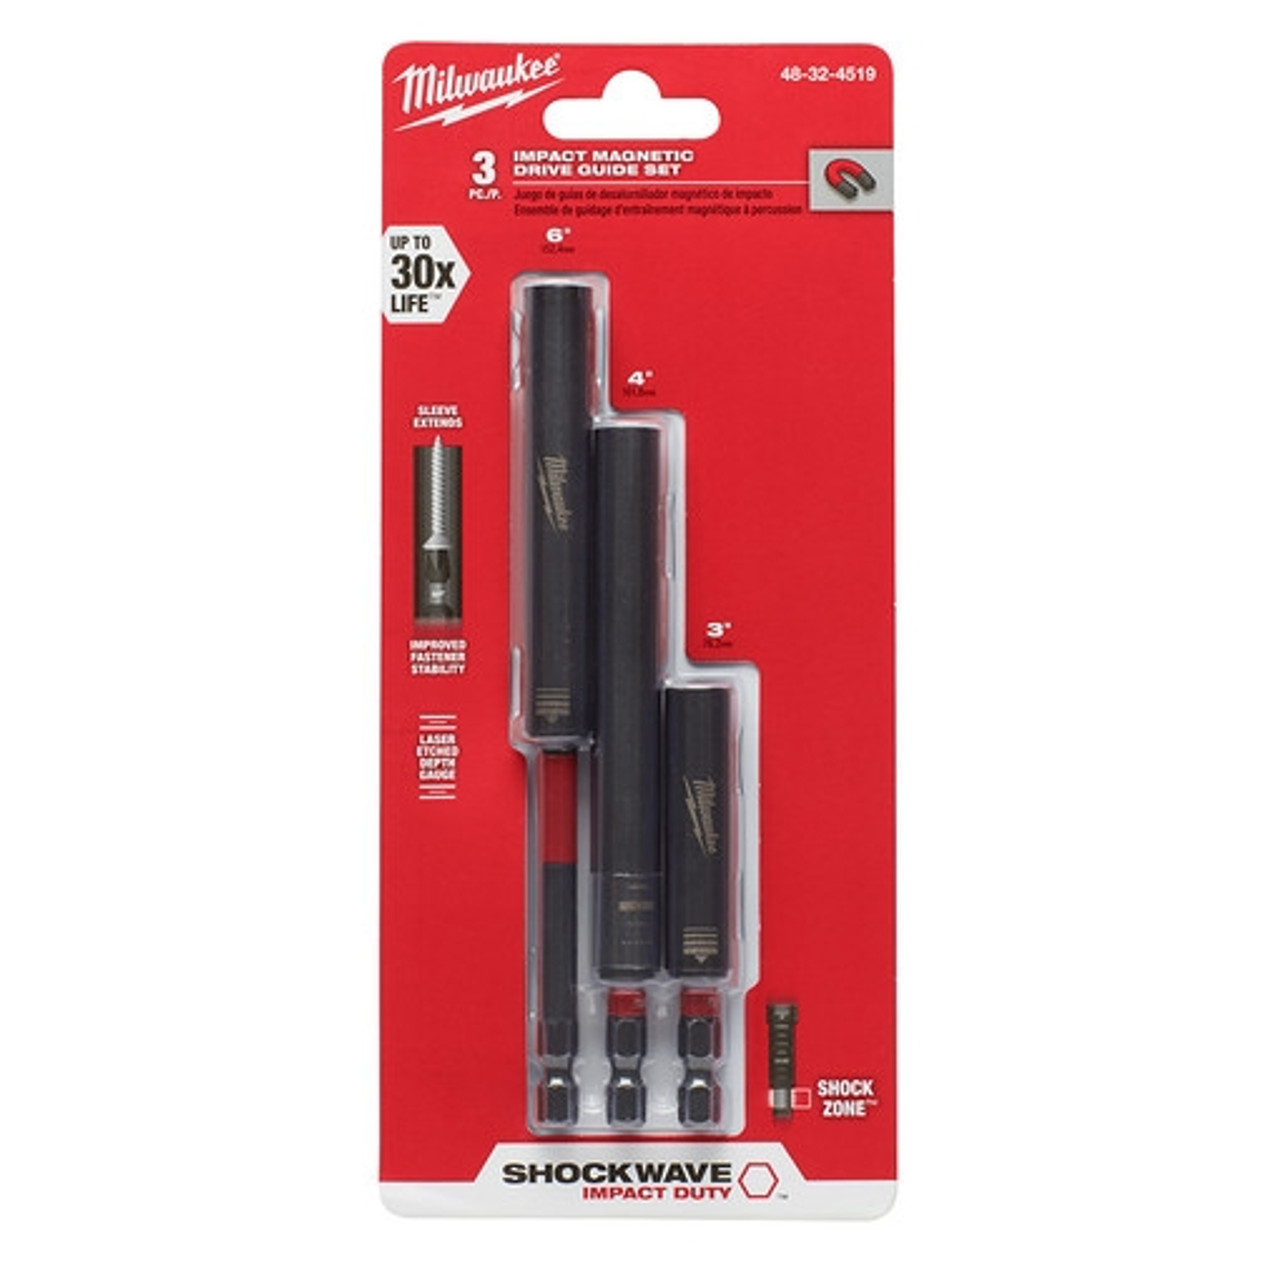 Milwaukee 48-32-4519 SHOCKWAVE 3pc Impact Magnetic Drive Guide Set